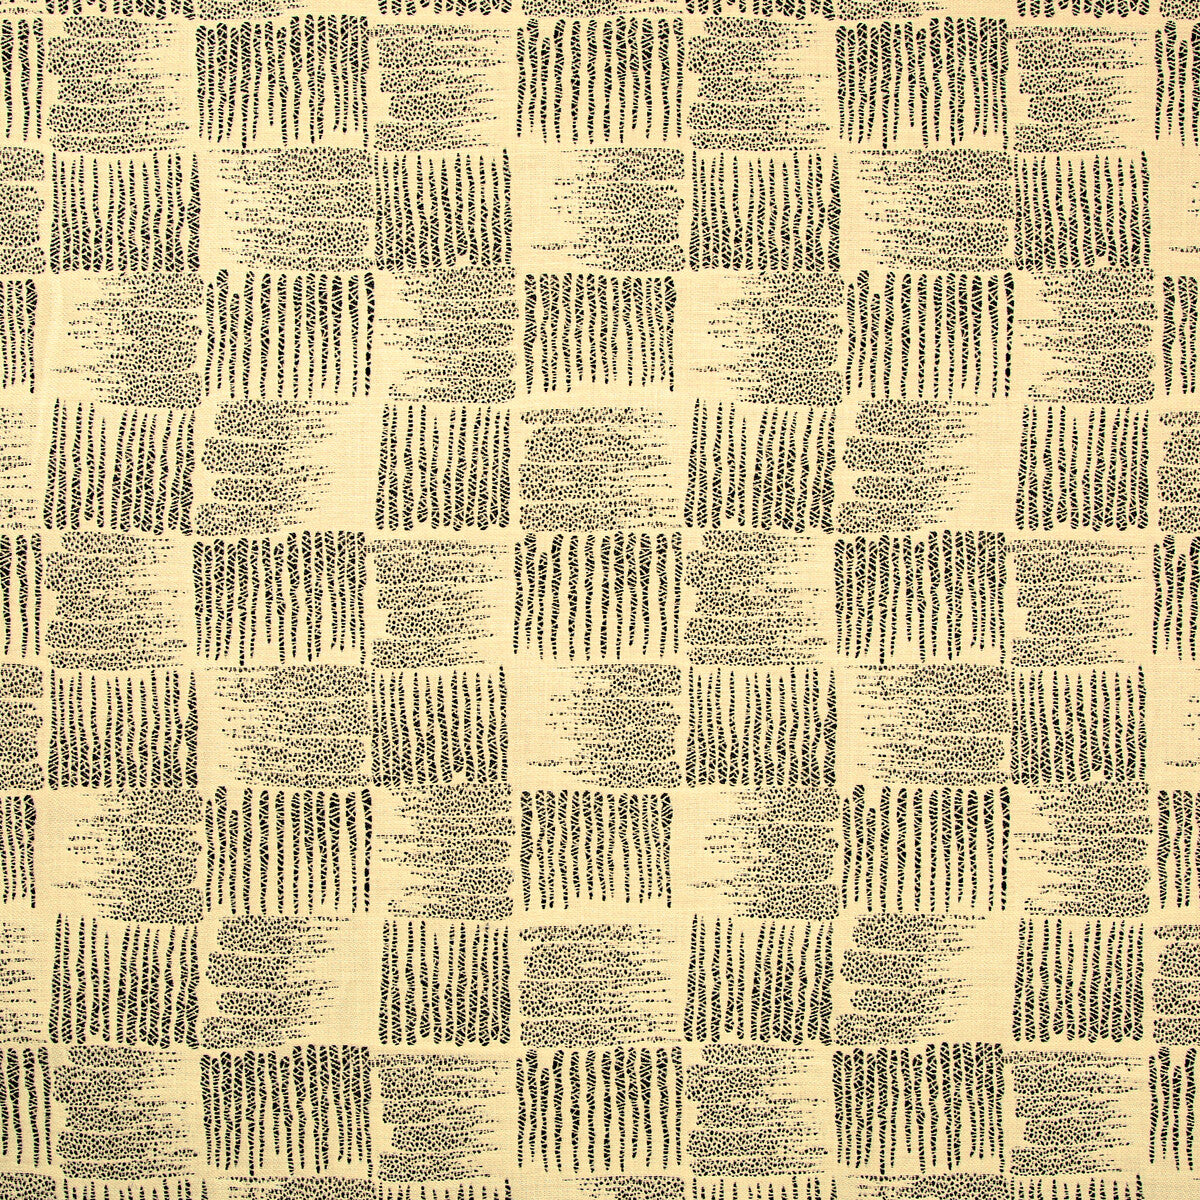 Motto fabric in tusk color - pattern 2019141.168.0 - by Lee Jofa Modern in the Kw Terra Firma III Indoor Outdoor collection